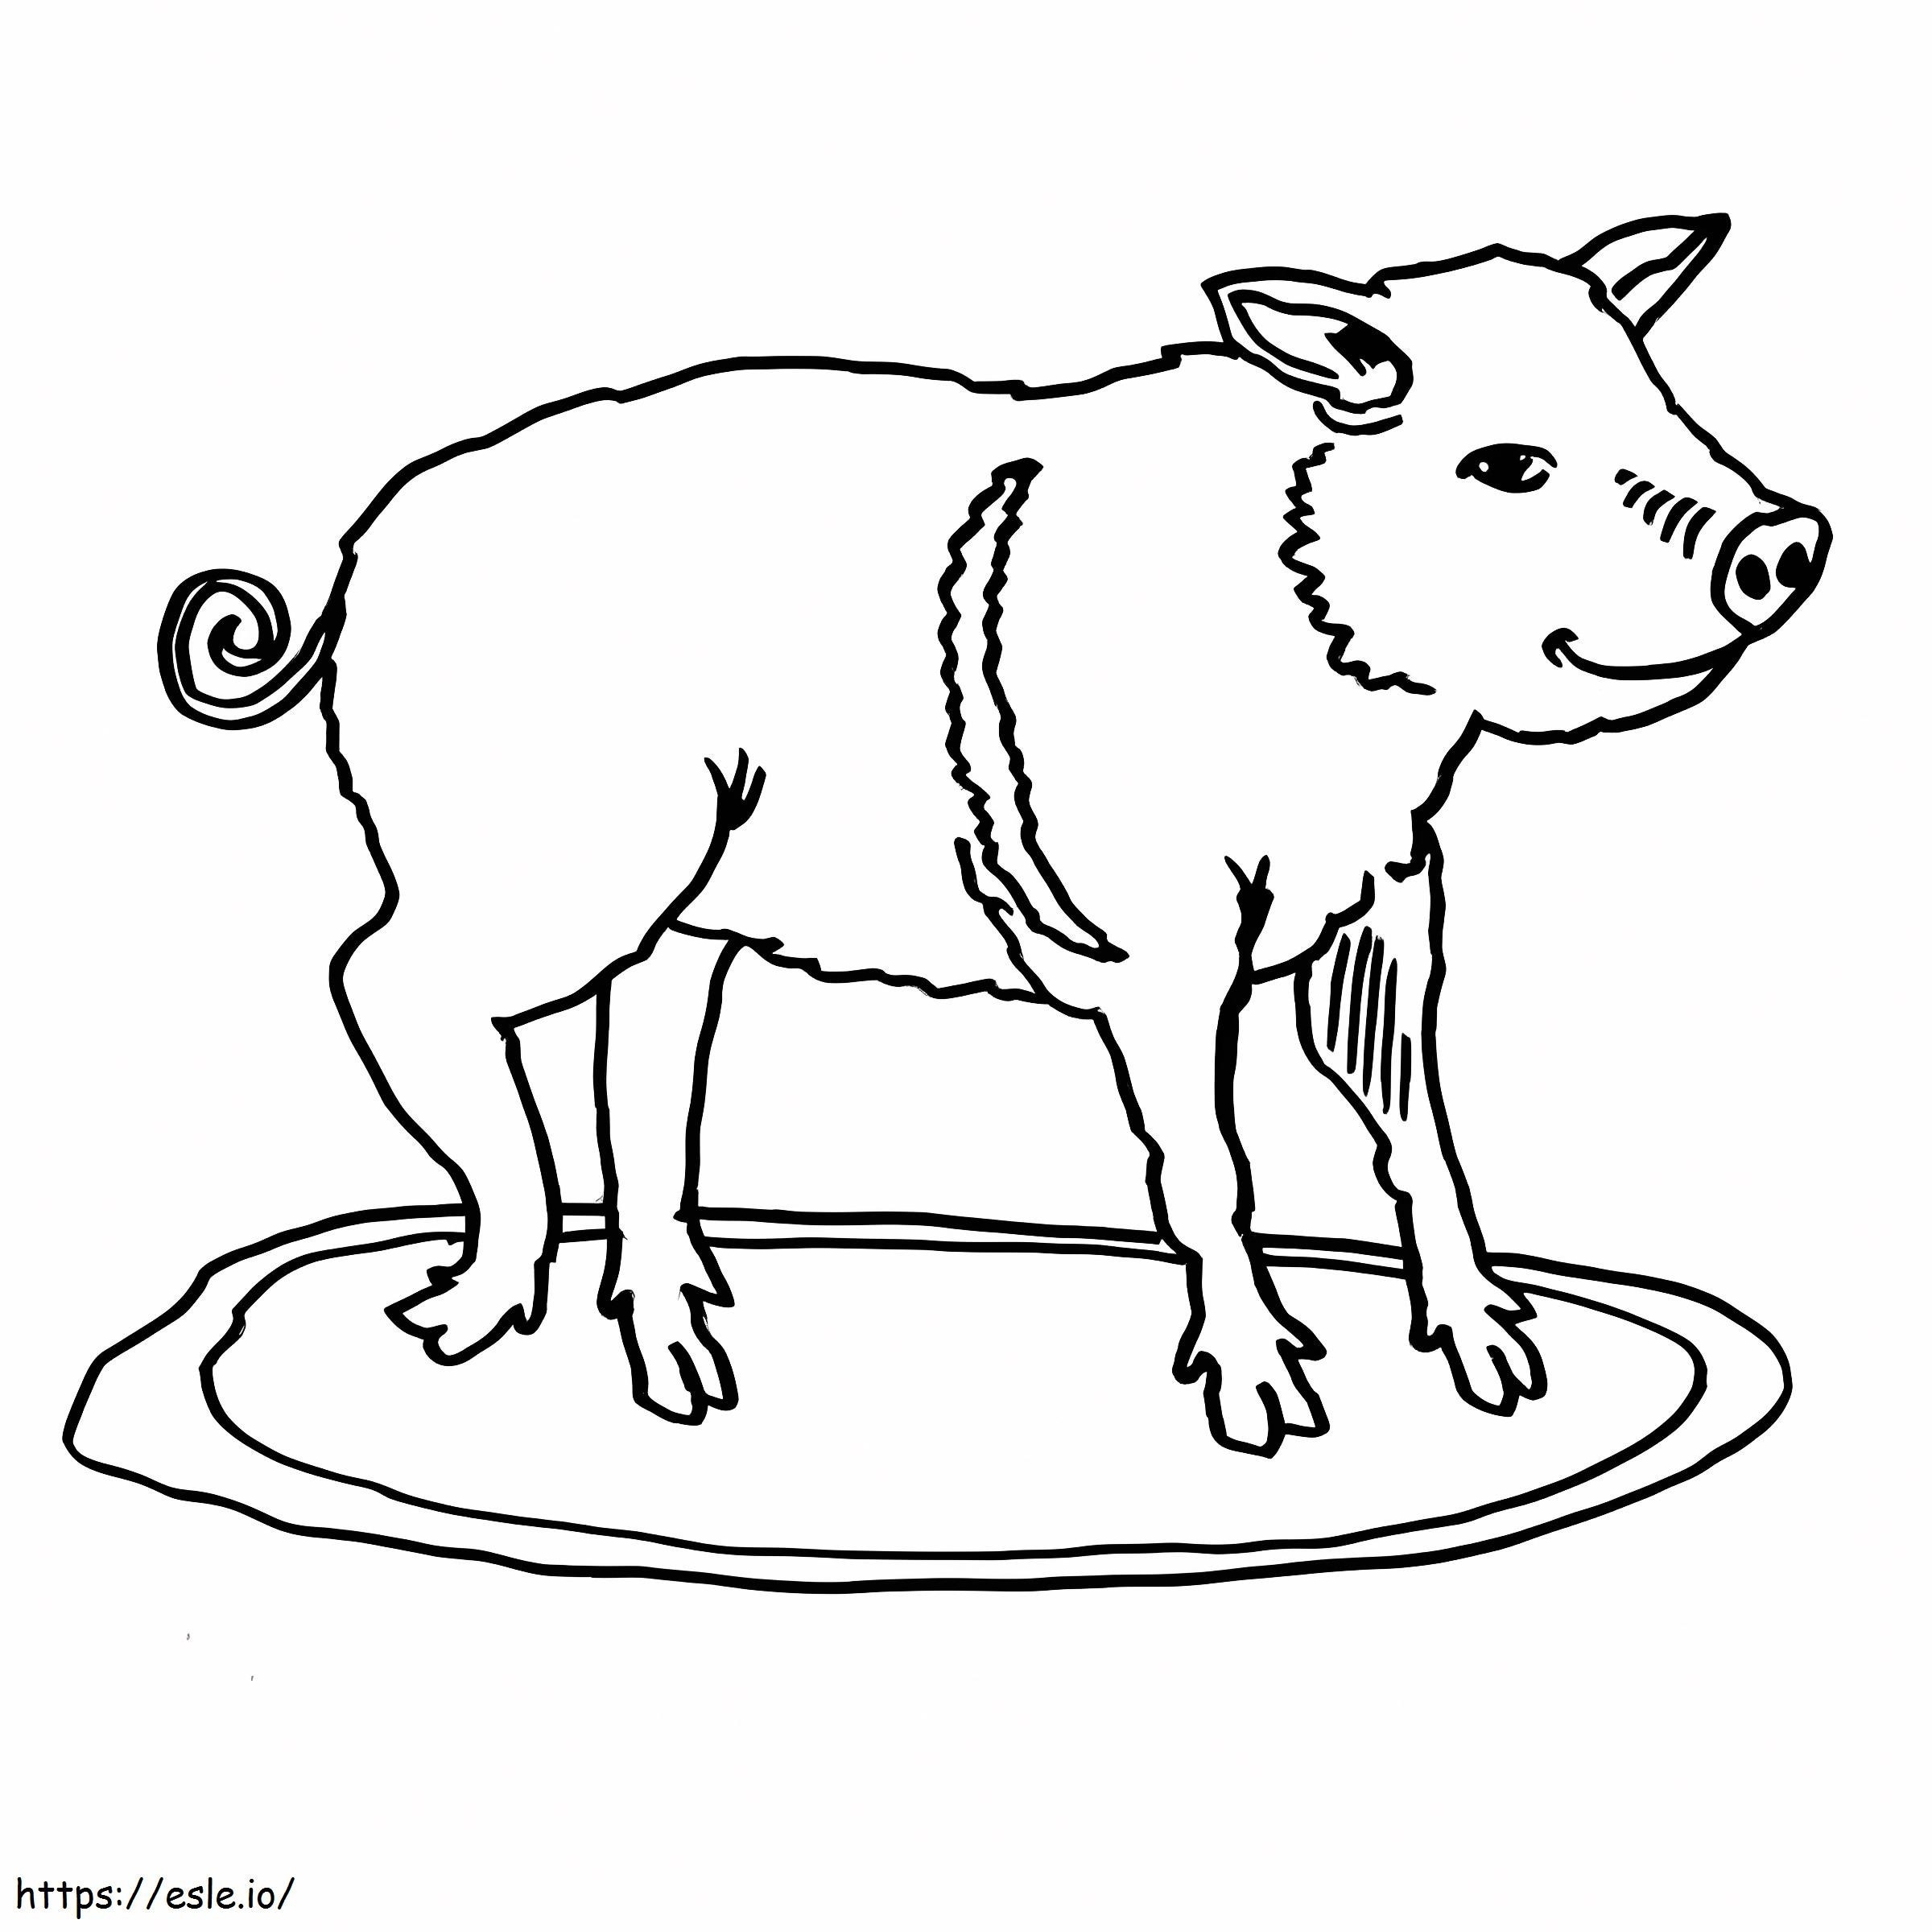 Hungry Pig coloring page